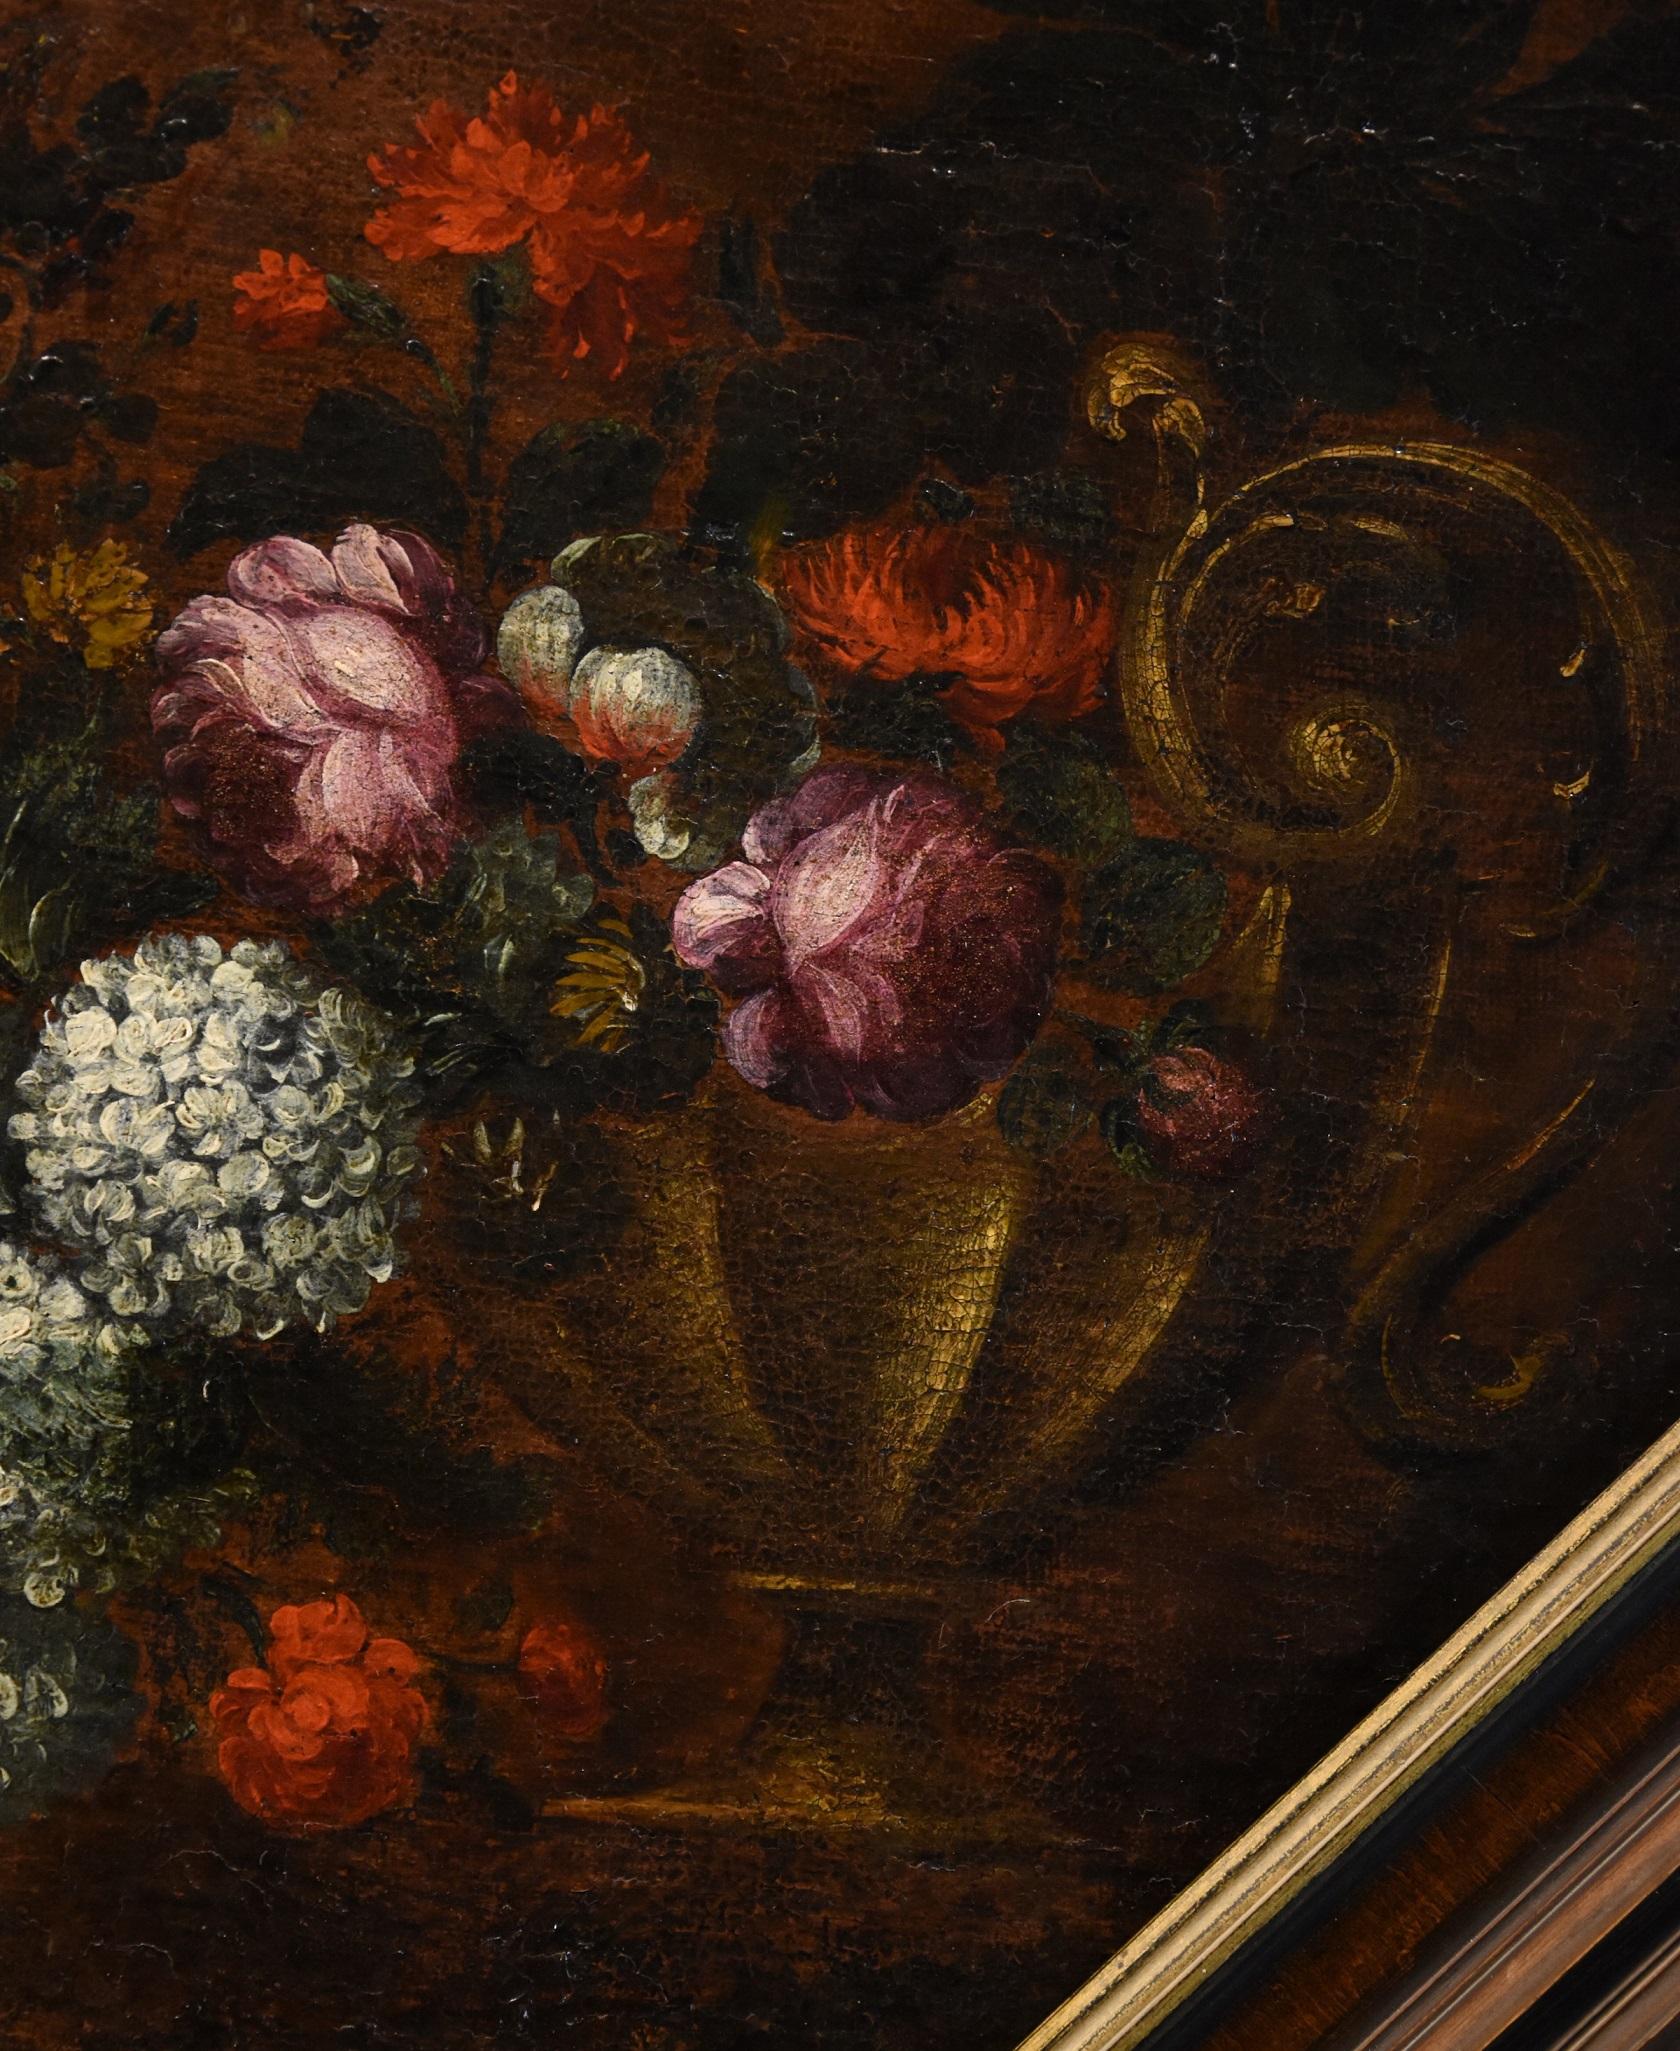 Francesca Volò Smiller, called Vincenzina (Milan, 1657 - 1700) - circle of
Floral composition

Oil on canvas (97 x 72 cm. - in octagonal frame 100 x 84 cm.)

A rich floral composition, arranged with a meditated casualness on two planes at different